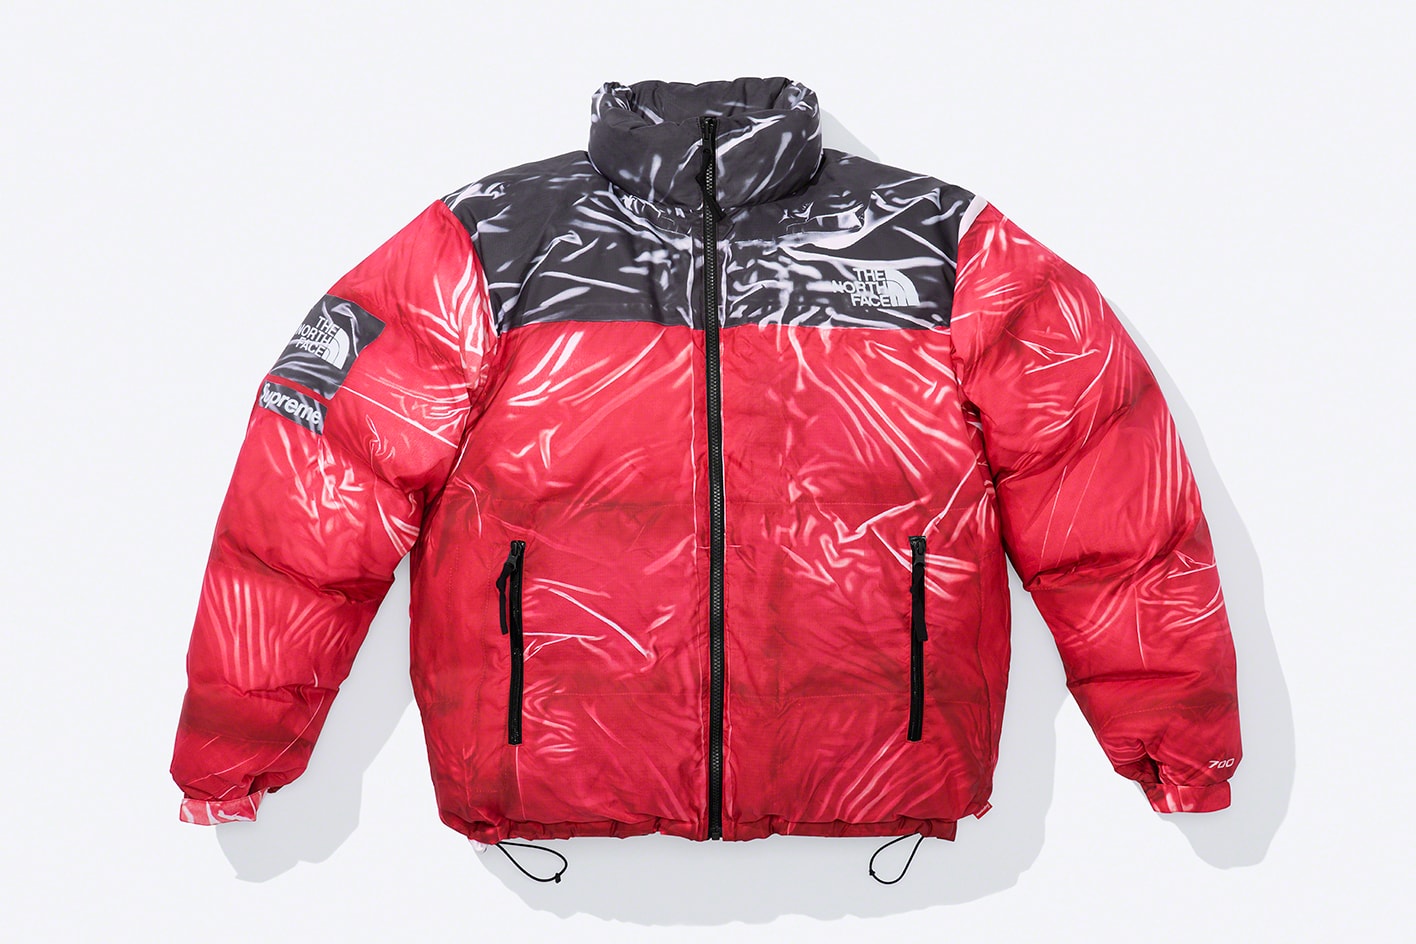 Supreme®/The North Face®. 11/25/2022 Supreme has worked with The